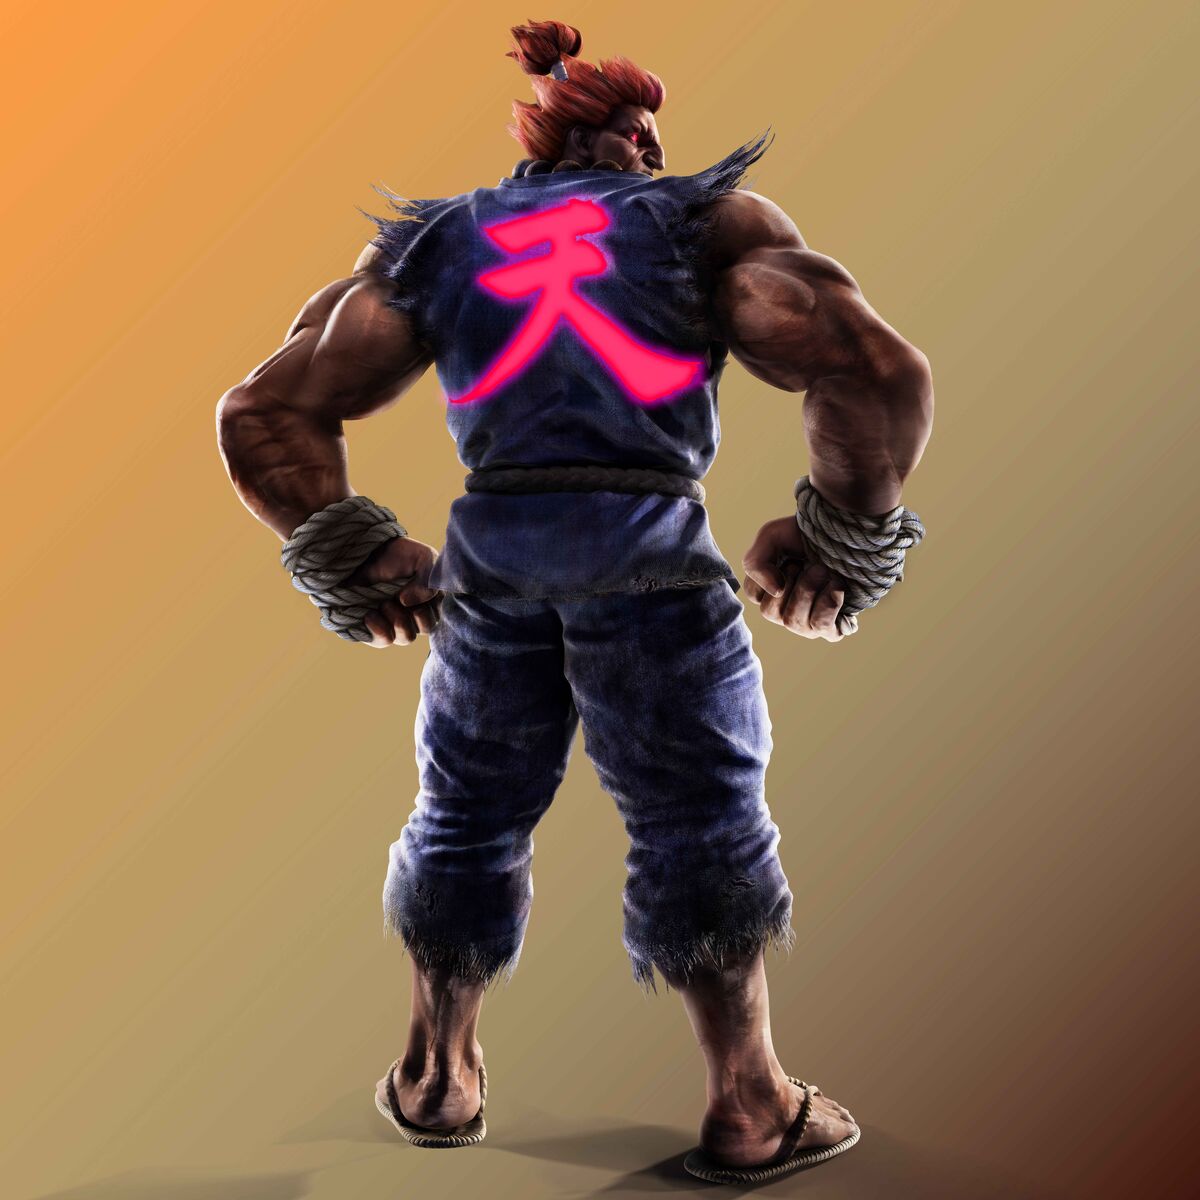 Akuma Voice - Street Fighter: Duel (Video Game) - Behind The Voice